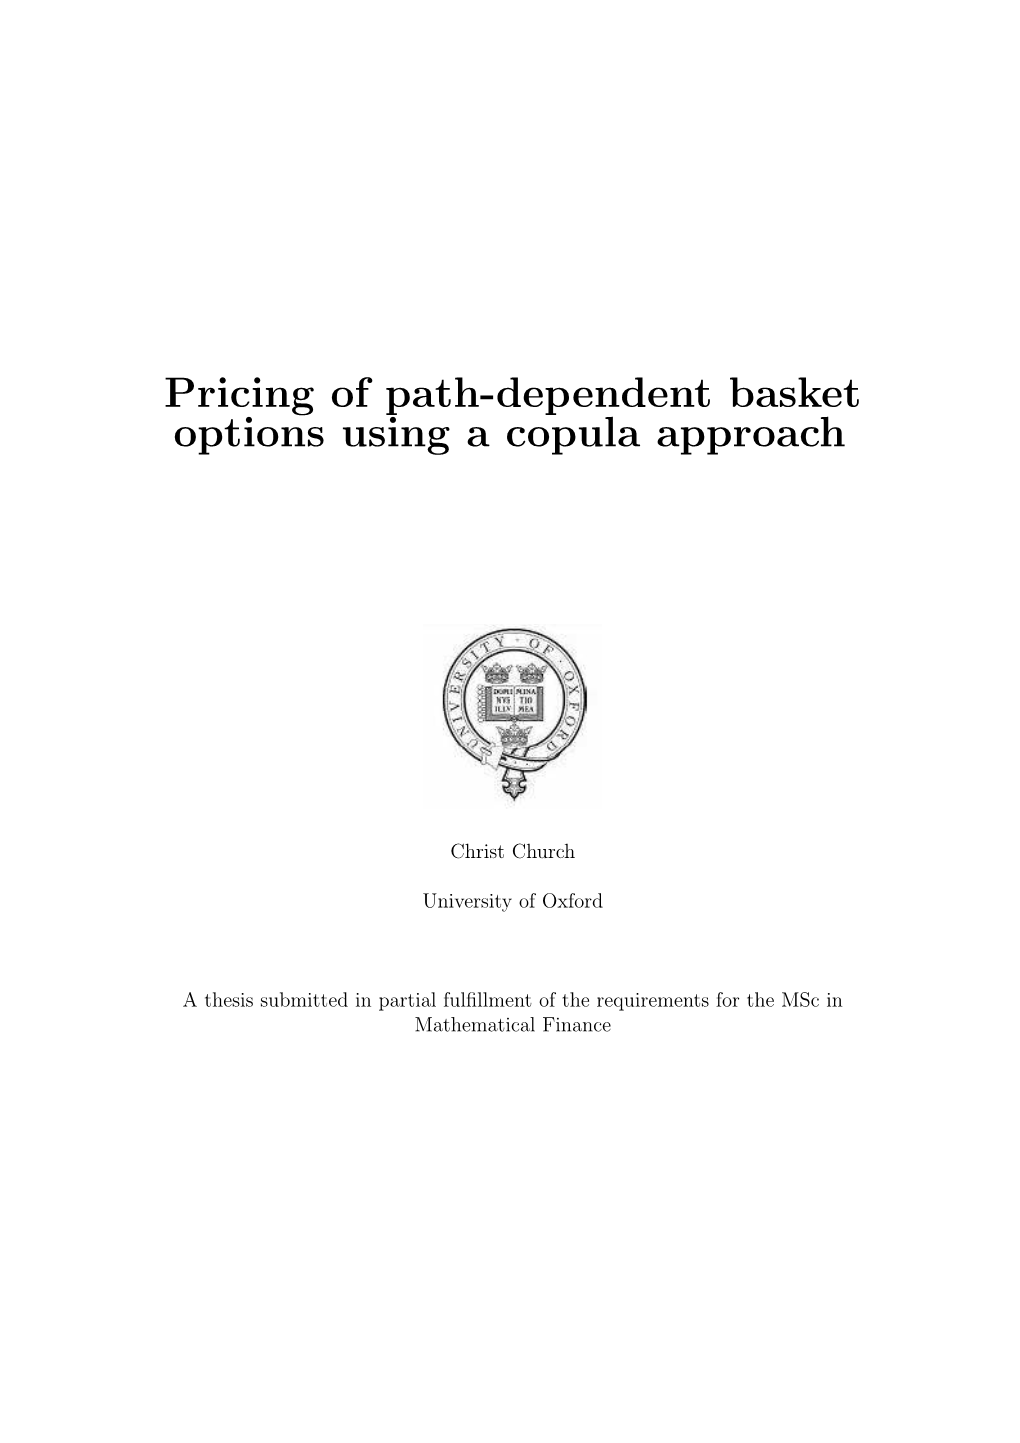 Pricing of Path-Dependent Basket Options Using a Copula Approach